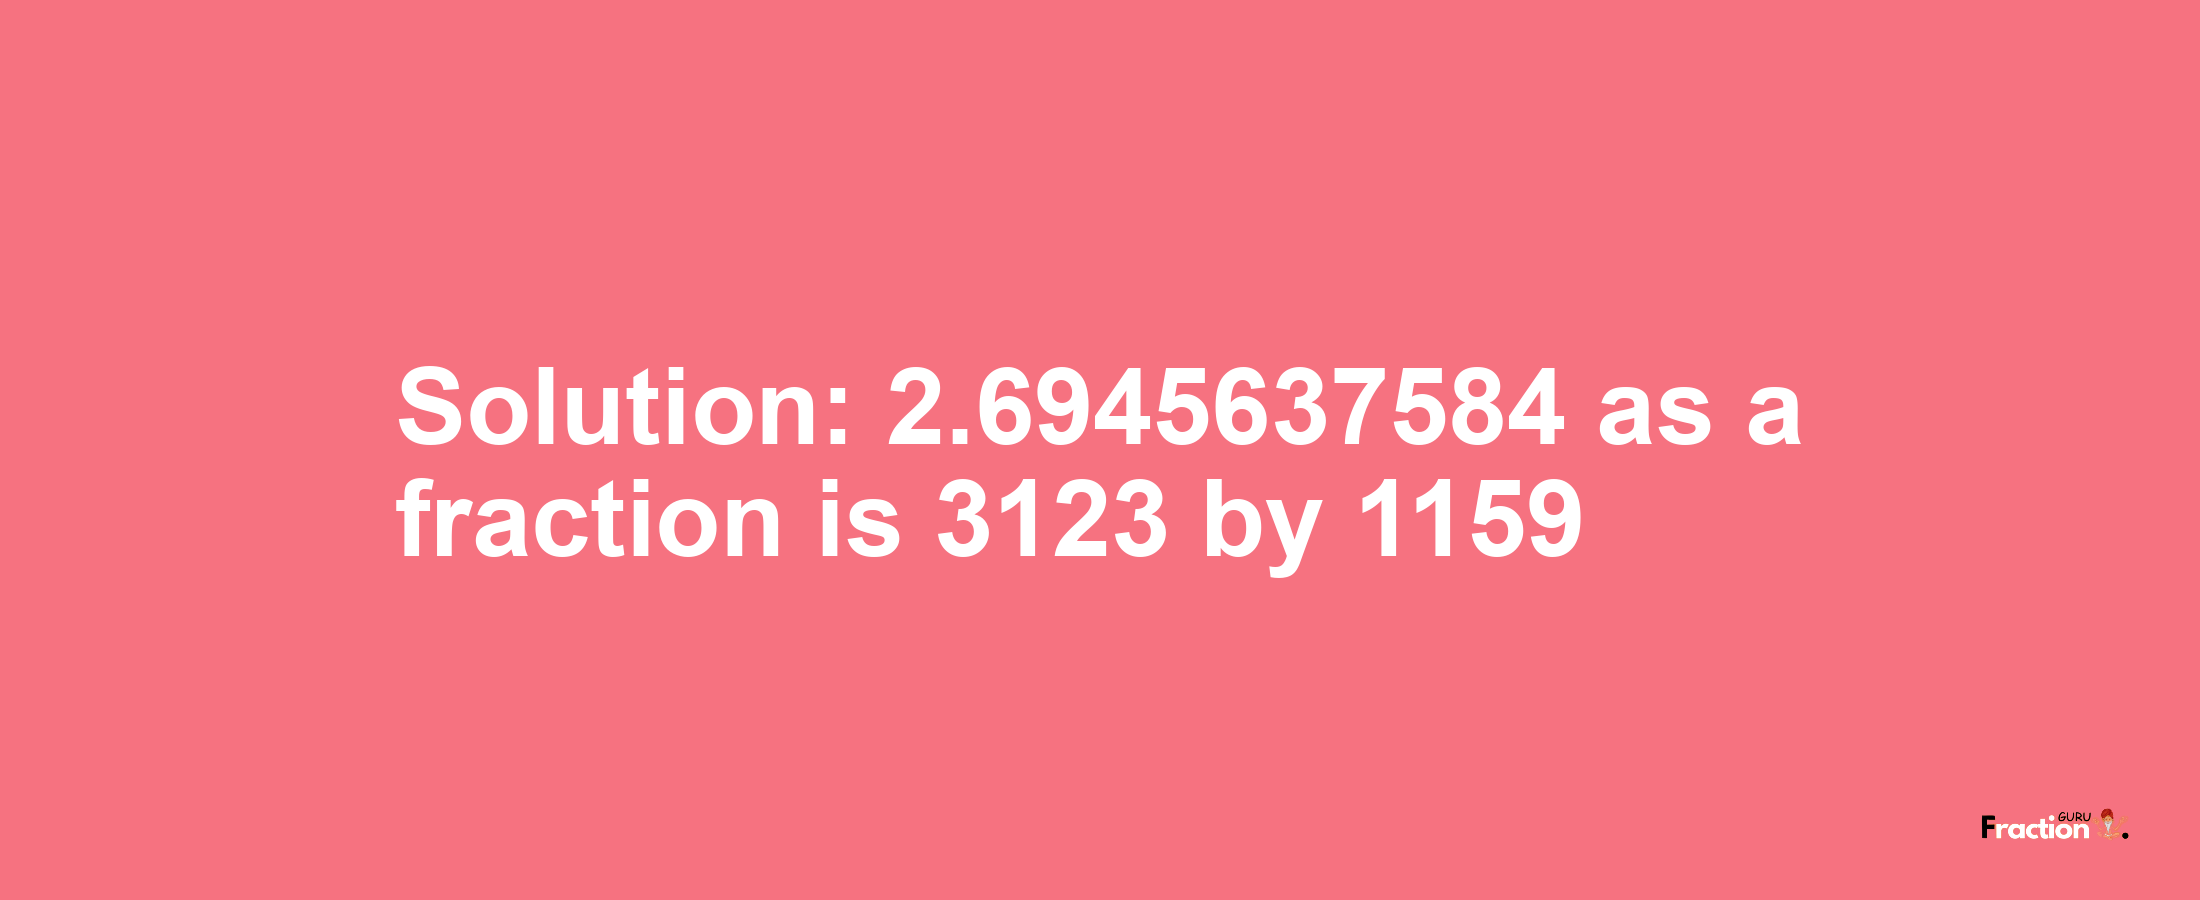 Solution:2.6945637584 as a fraction is 3123/1159